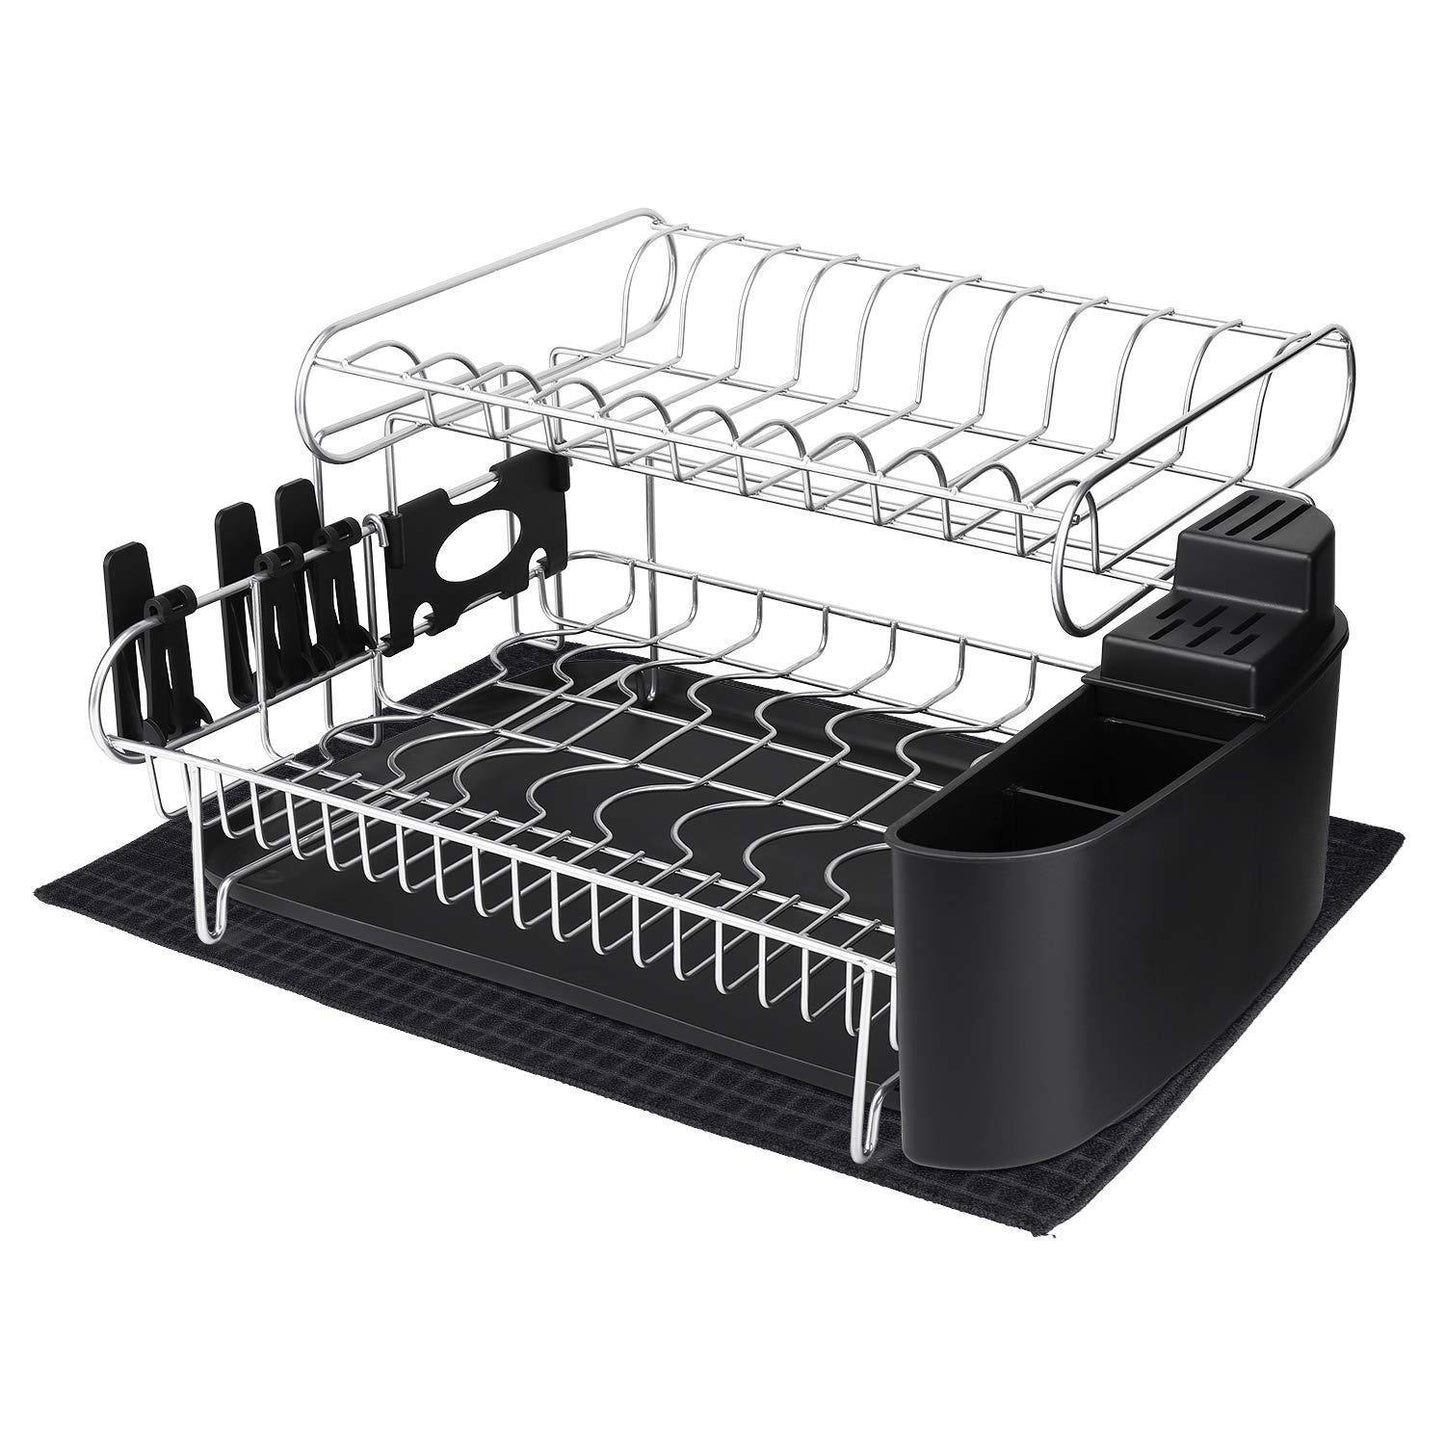 alvorog 2-Tier Dish Drying Rack Large Capacity Dish Holder Rack Microfiber Mat Included Fully Customizable Kitchen Organizer with Removable Drainboard/Cutlery Cup Holder